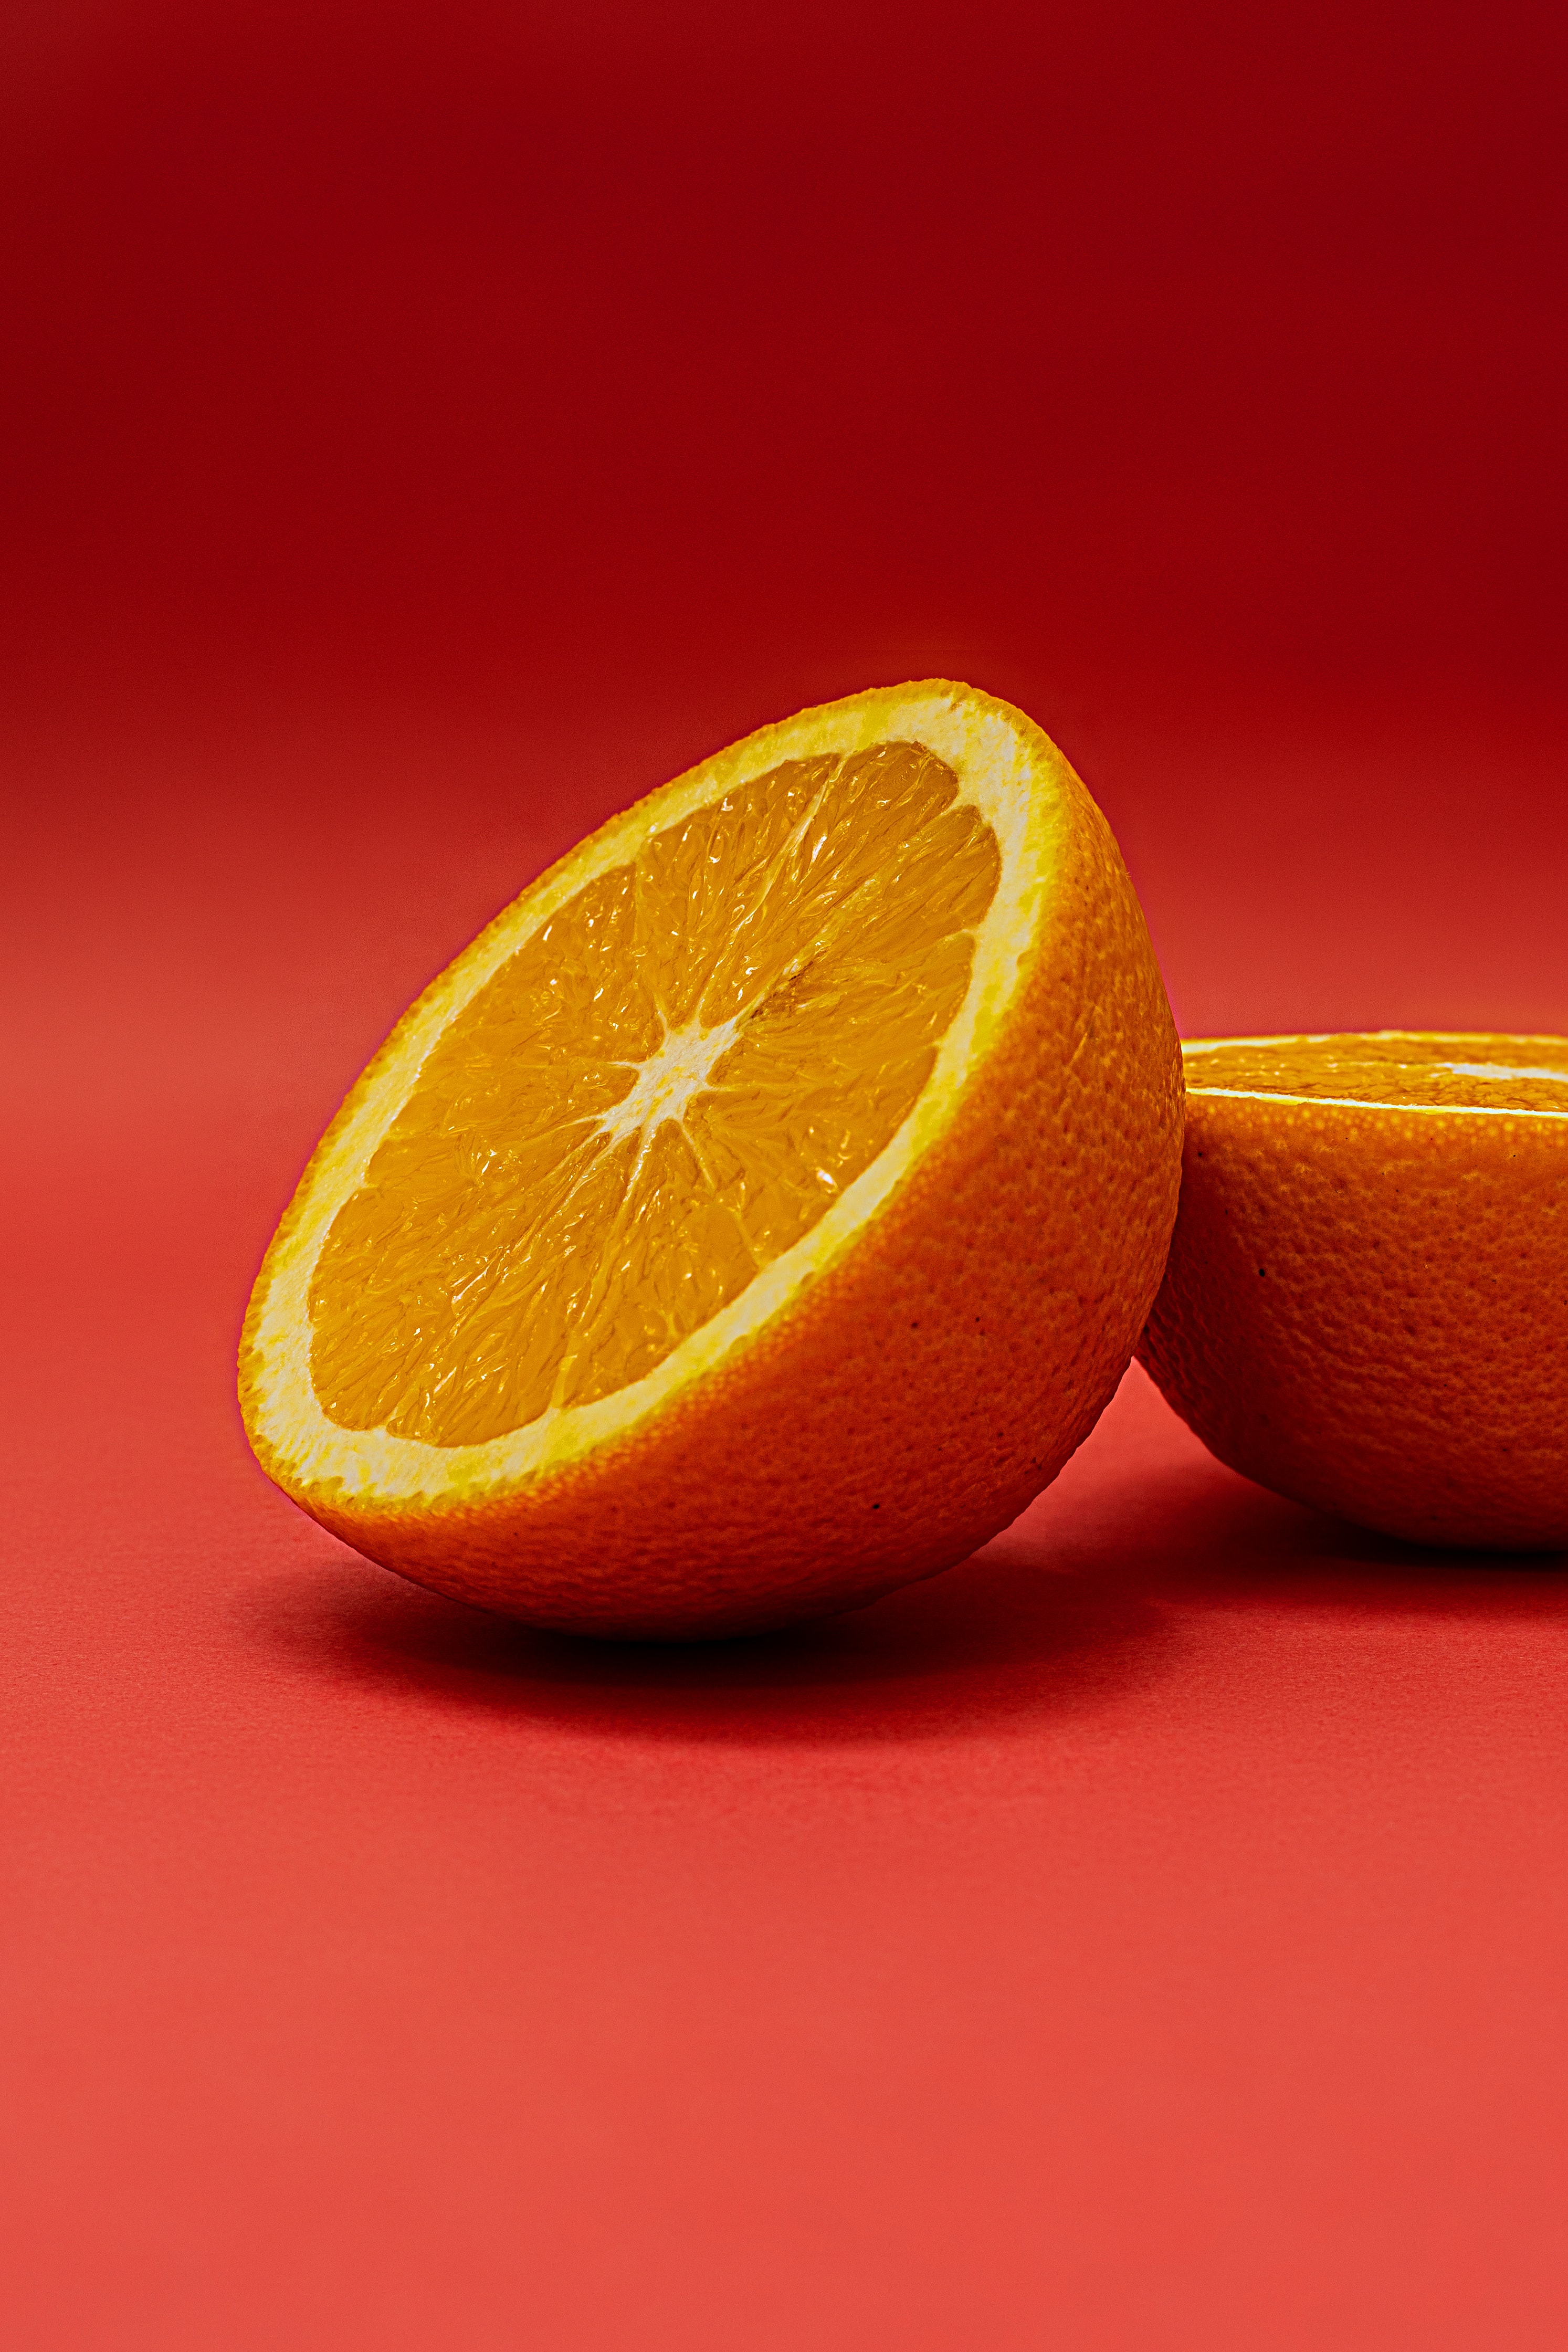 65724 free download Orange wallpapers for phone,  Orange images and screensavers for mobile